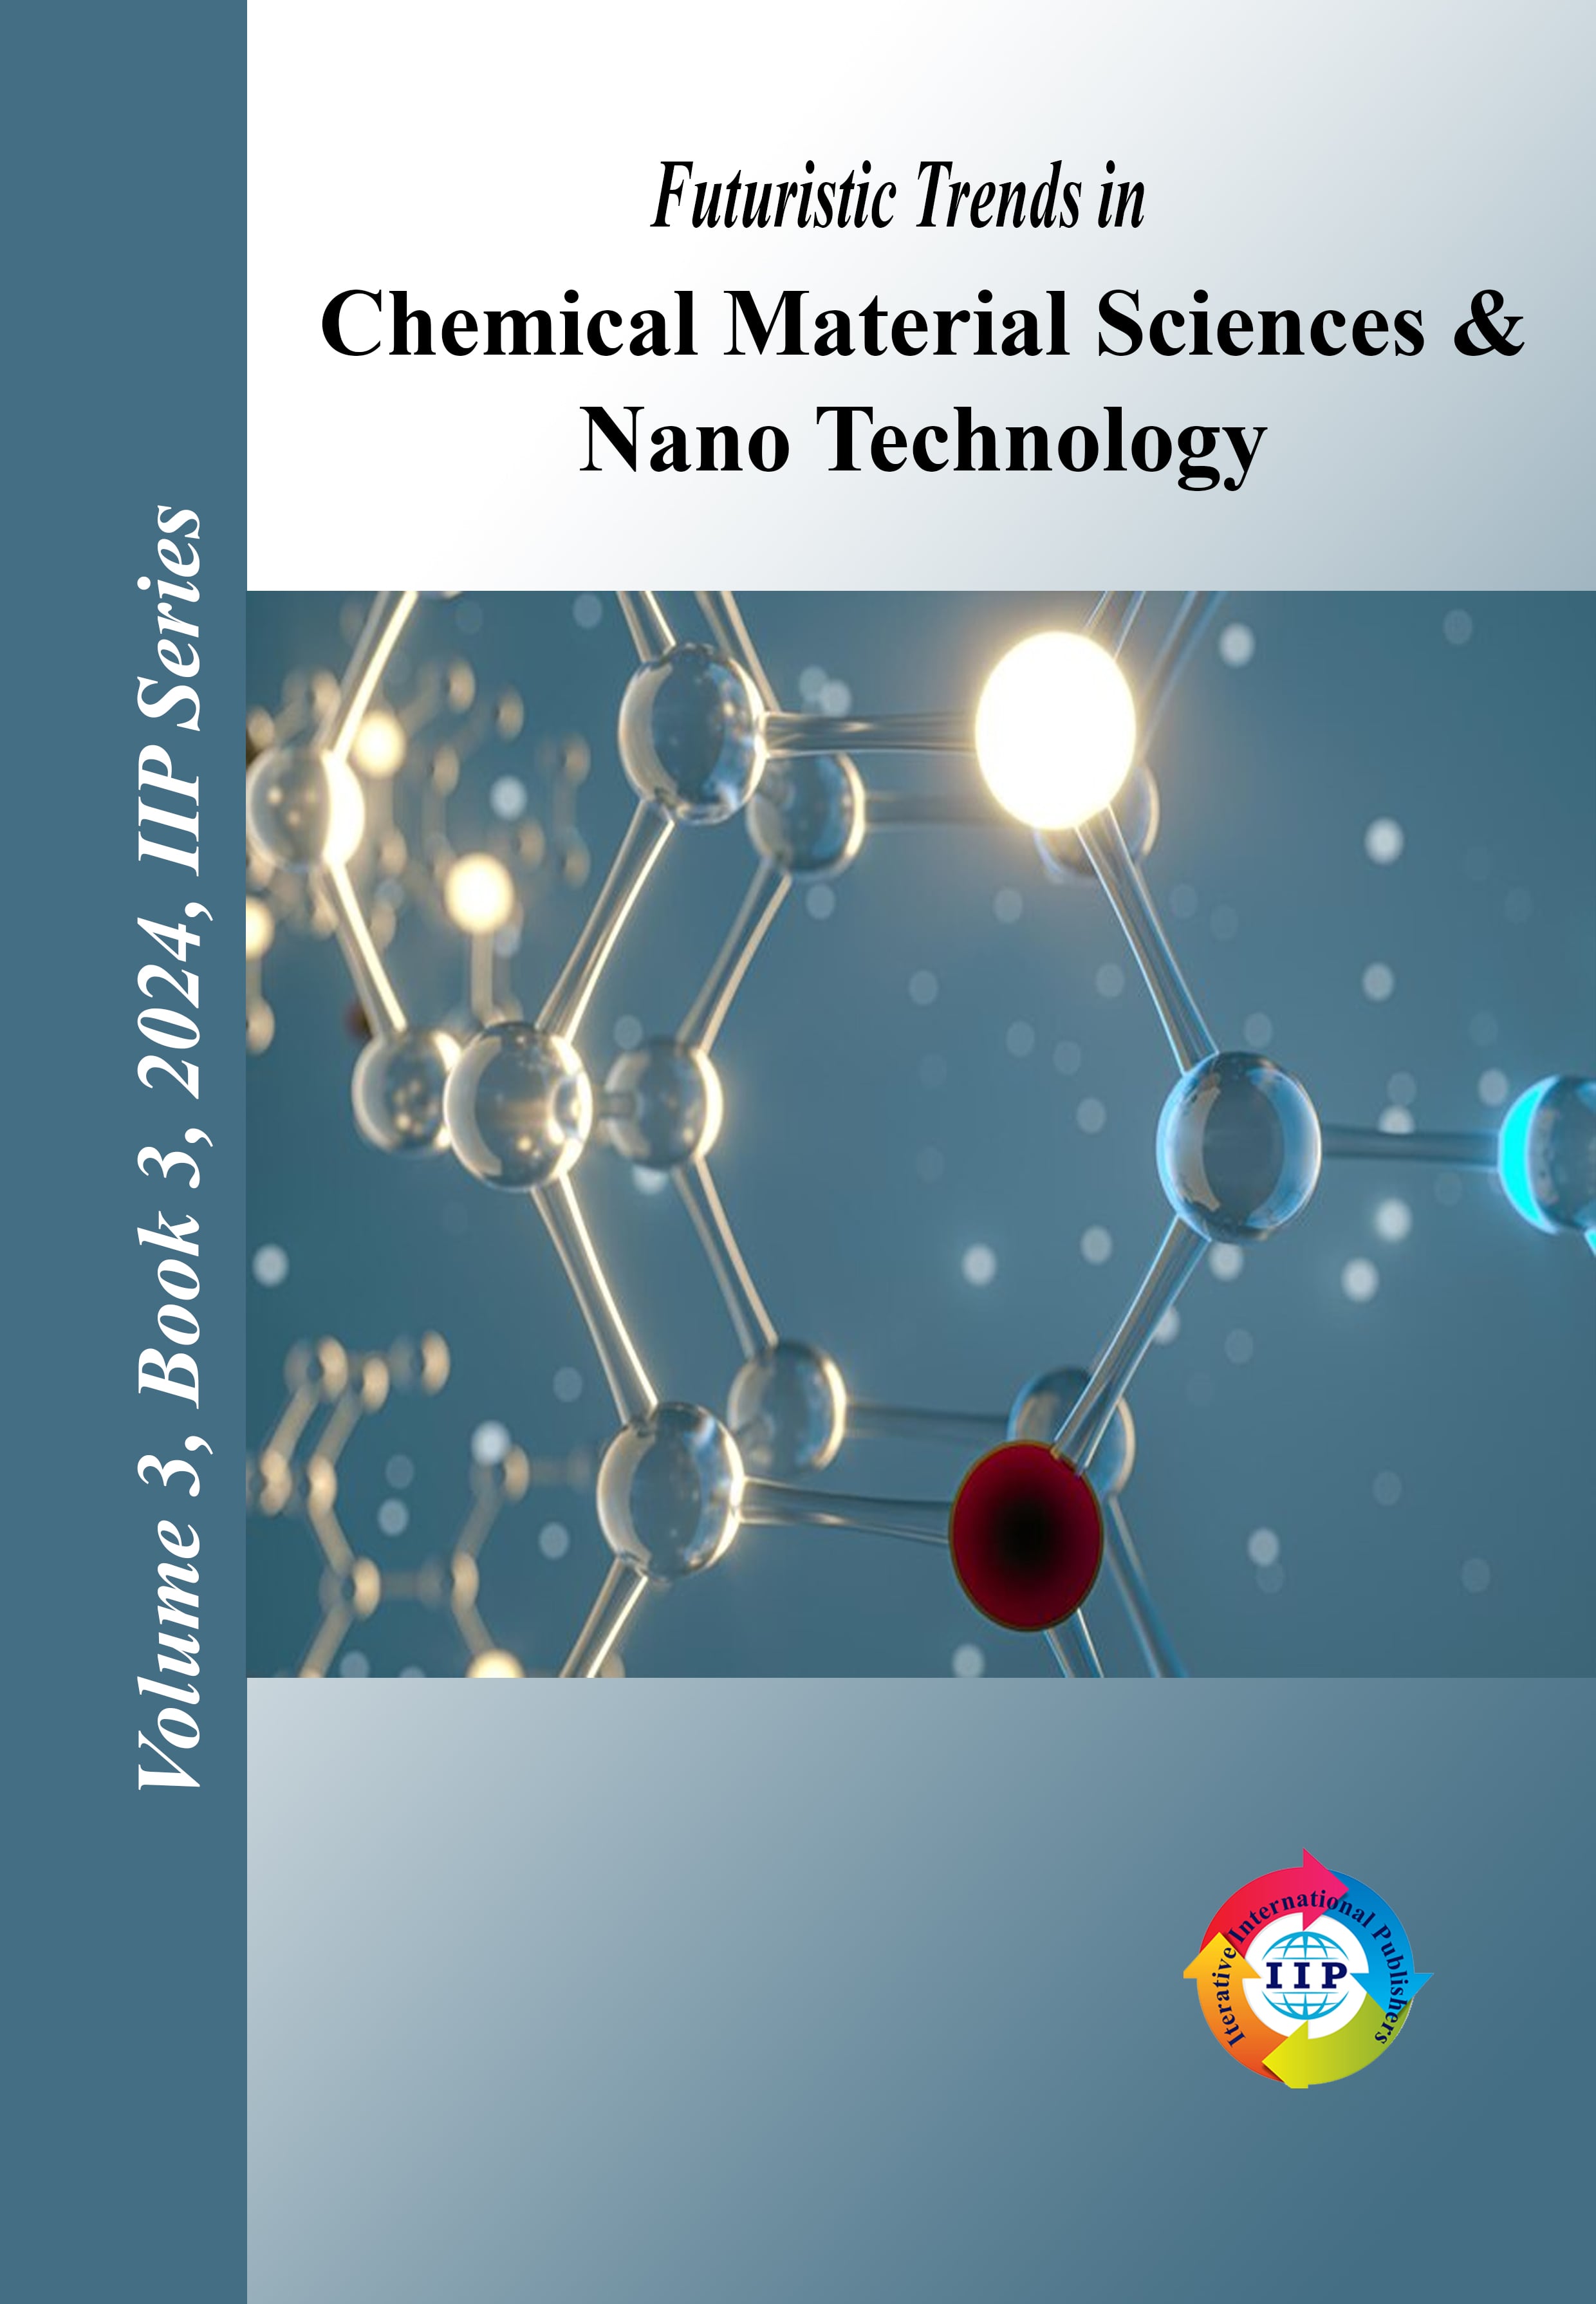 Futuristic Trends in Chemical Material Sciences & Nano Technology  Volume 3 Book 3